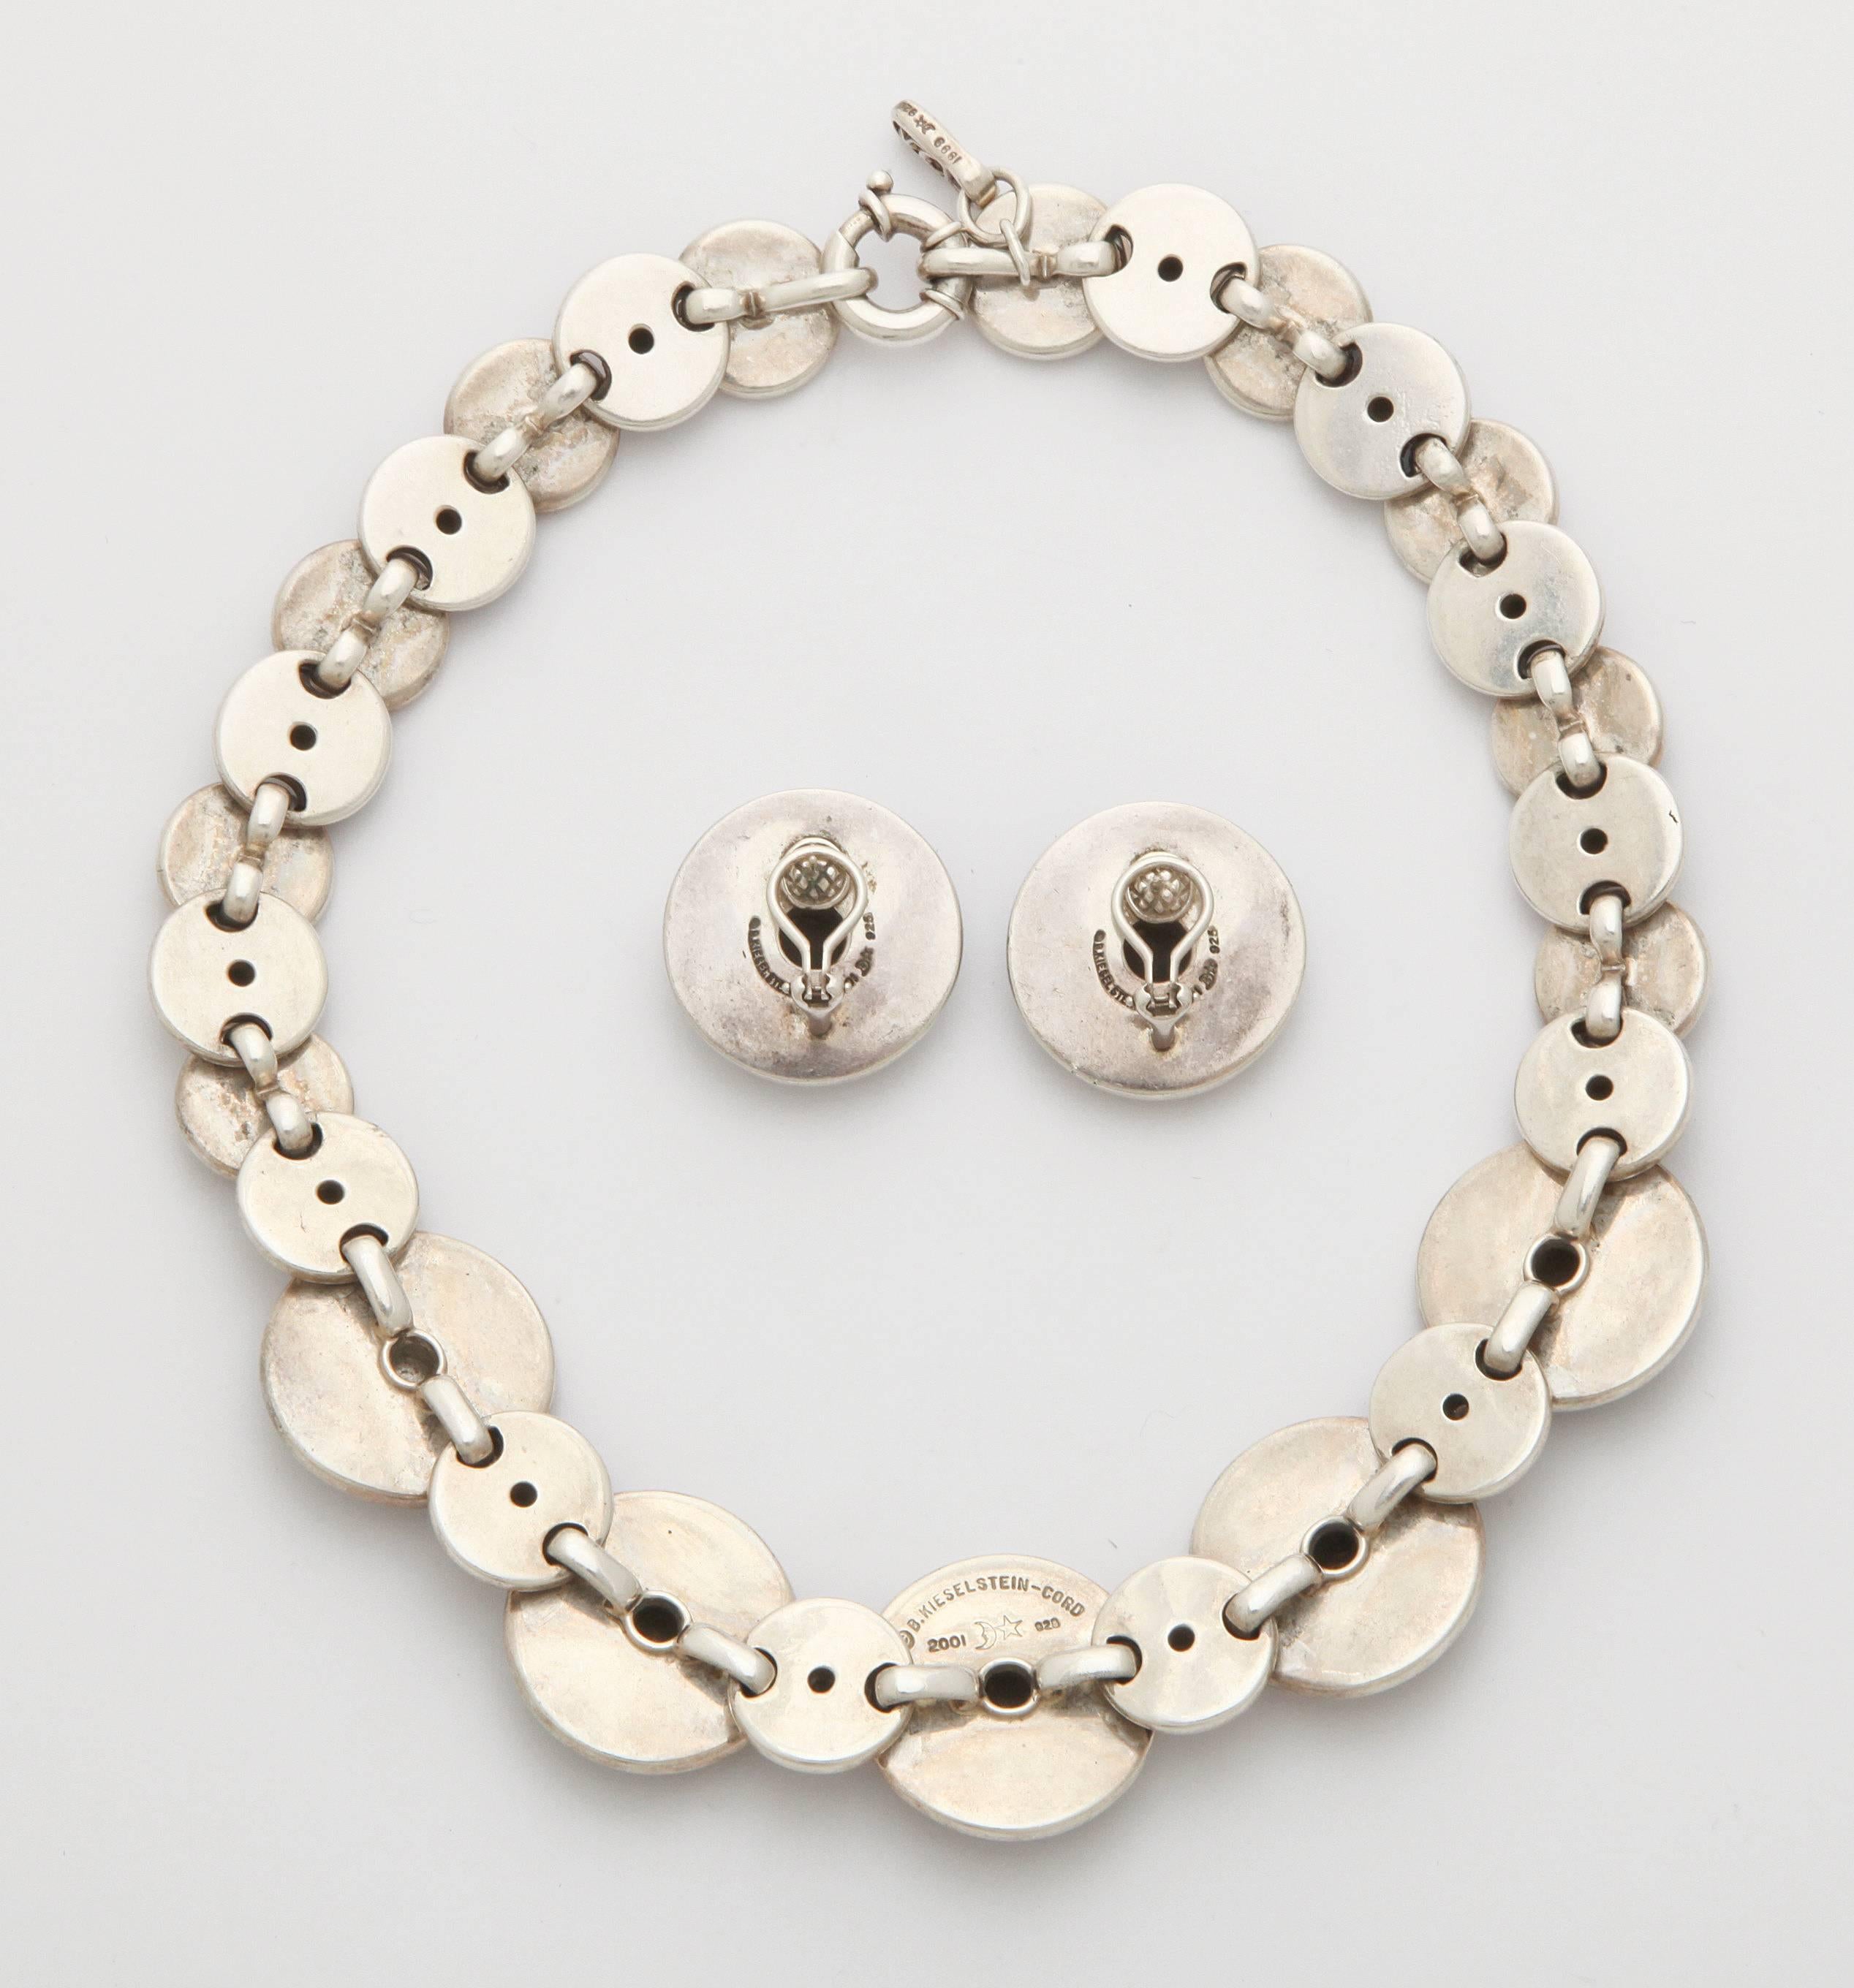 A bold and striking necklace with matching ear clips by award winning designer Barry Kieselstein-Cord, featuring substantial sterling silver discs inlaid with beautifully marbled tortoise shell. Necklace length of 18 1/2 inches, and ear clips of 1